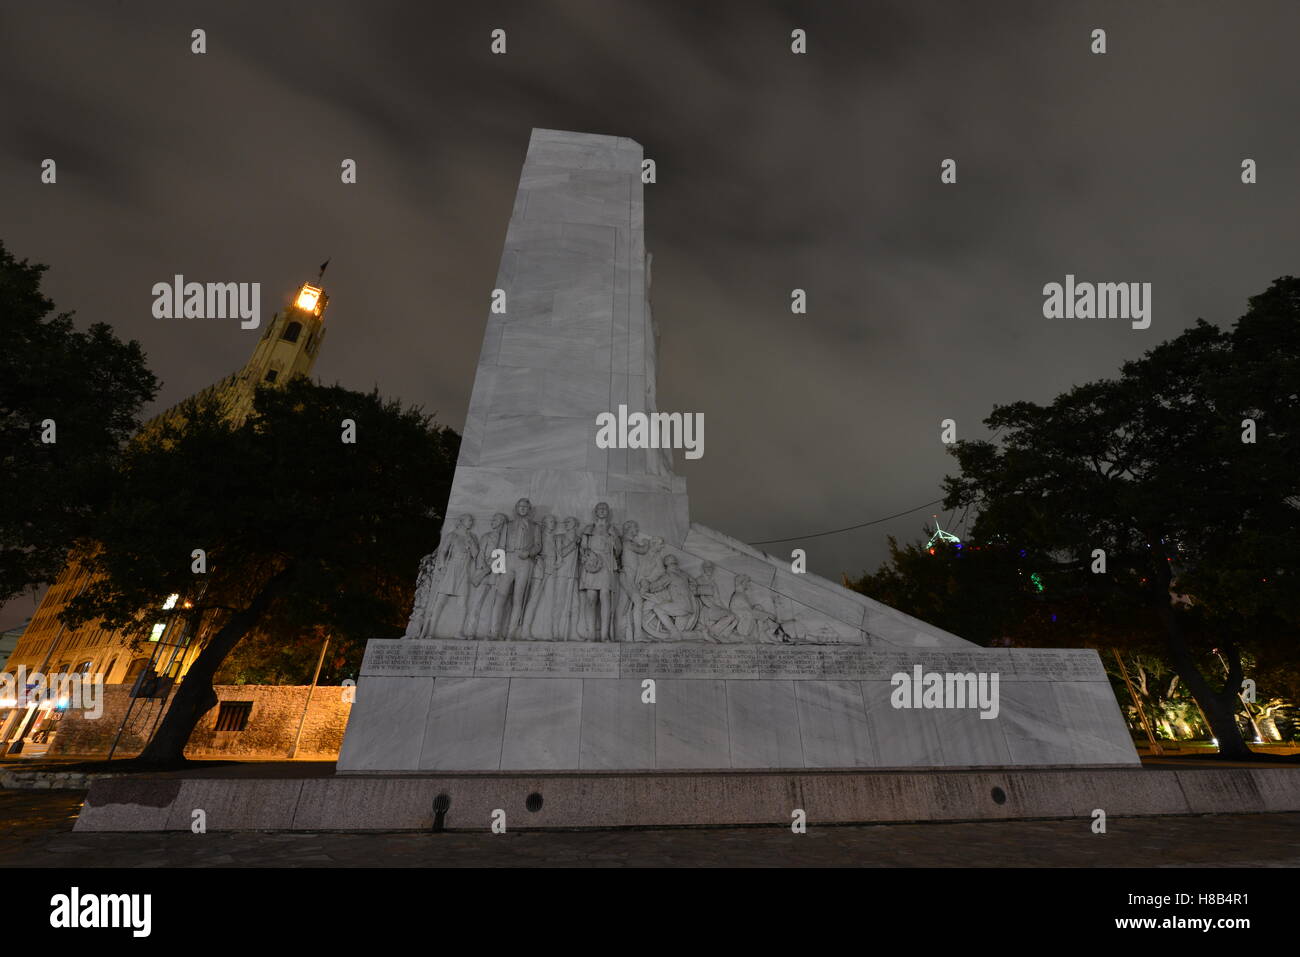 The Cenotaph at the Alamo in San Antonio in Texas. The picture is taken at about the same time as the battle, before daylight. Stock Photo